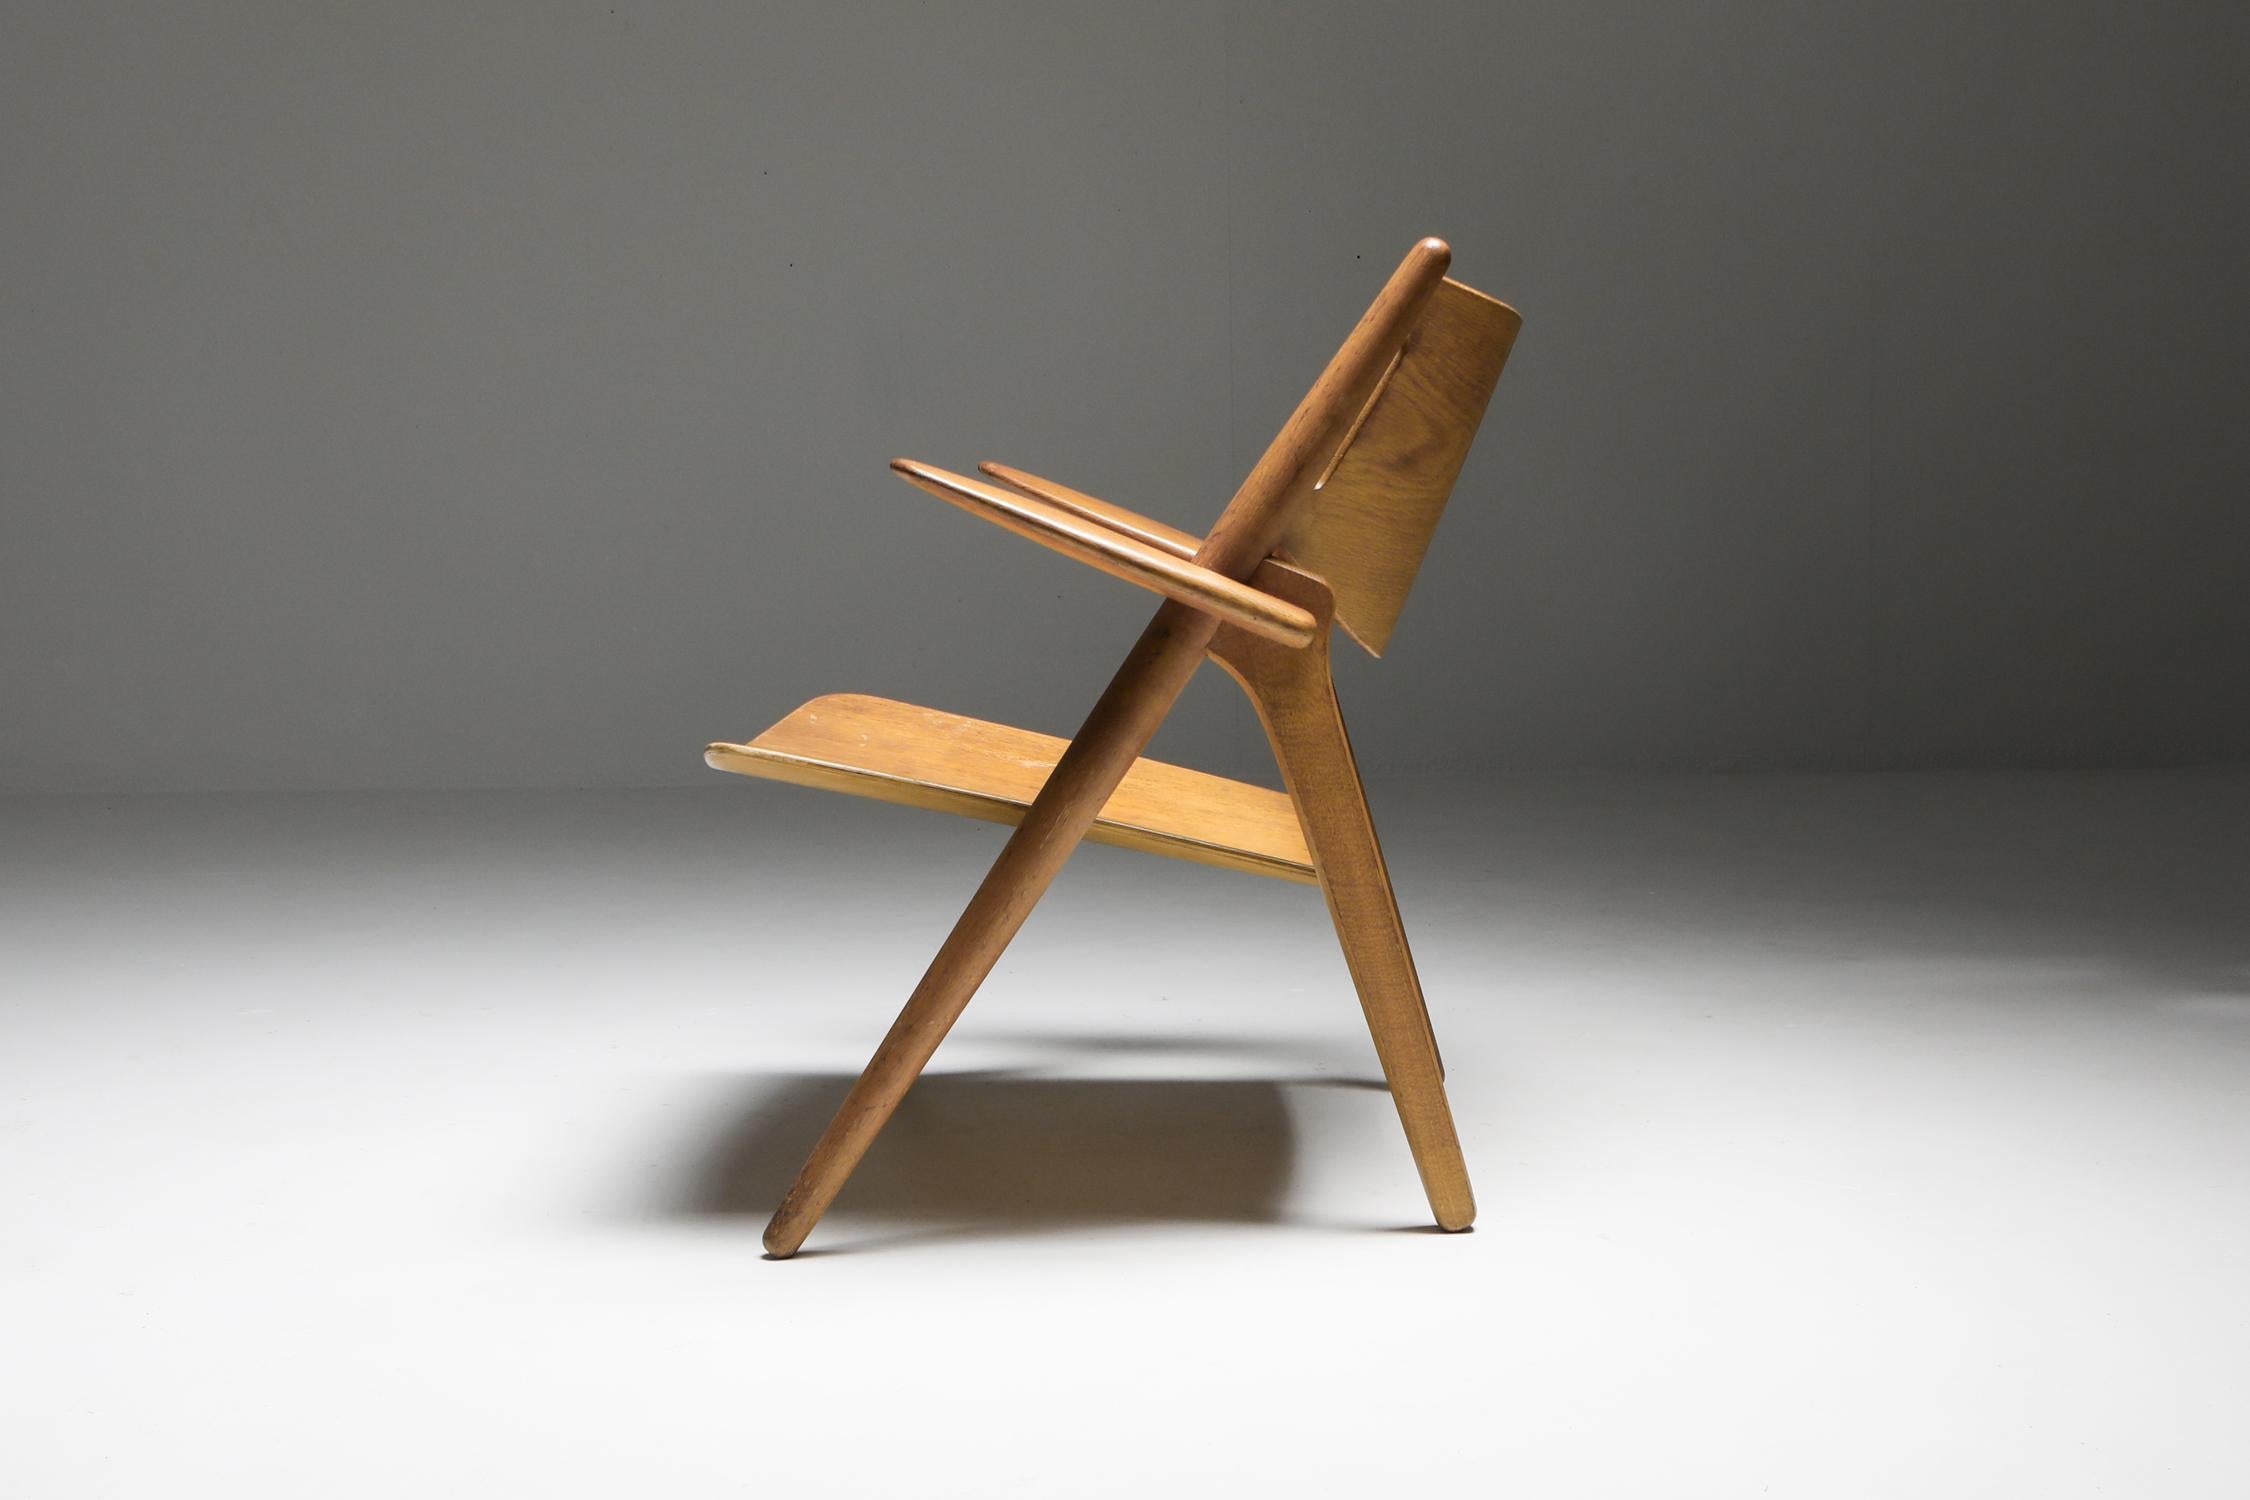 Danish modern, ch28 easy chair, Design Hans Wegner, 1952, Denmark

This is an original old early production chair. In great condition with a stunning patina.

The CH28 was originally designed in 1952. It is an elegant, very comfortable, pure